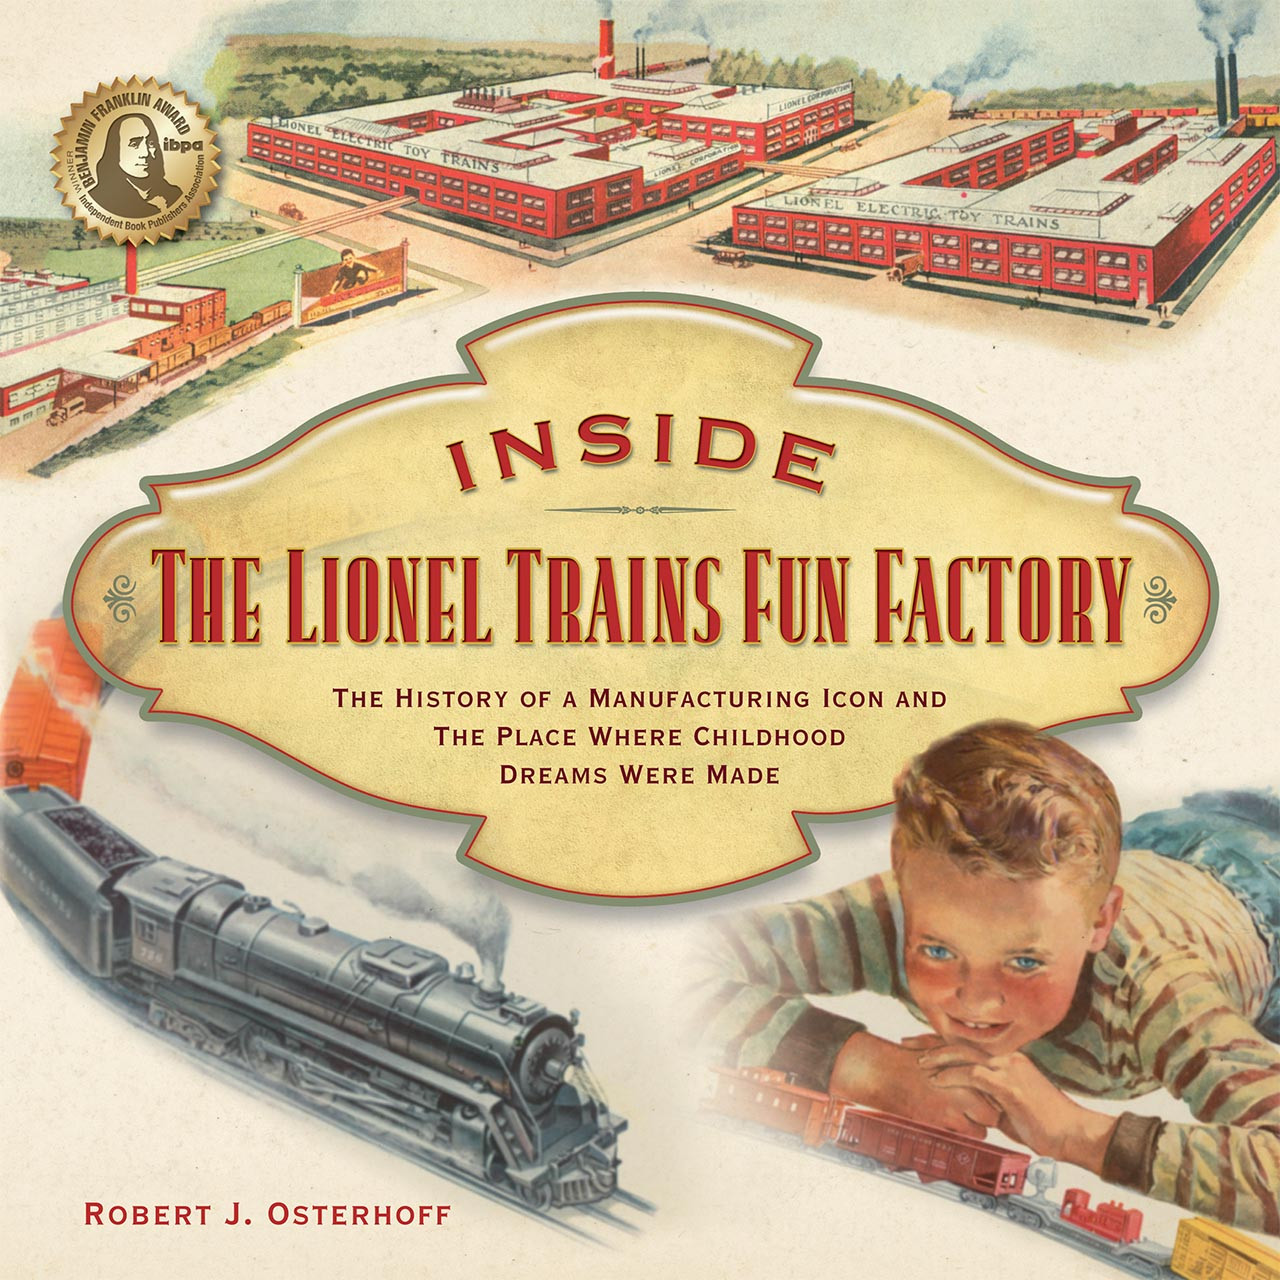 Inside-The-Lionel-Trains-Fun-Factory-The-History-of-a-Manufacturing-Icon-and-The-Place-Where-Childhood-Dreams-Were-Made